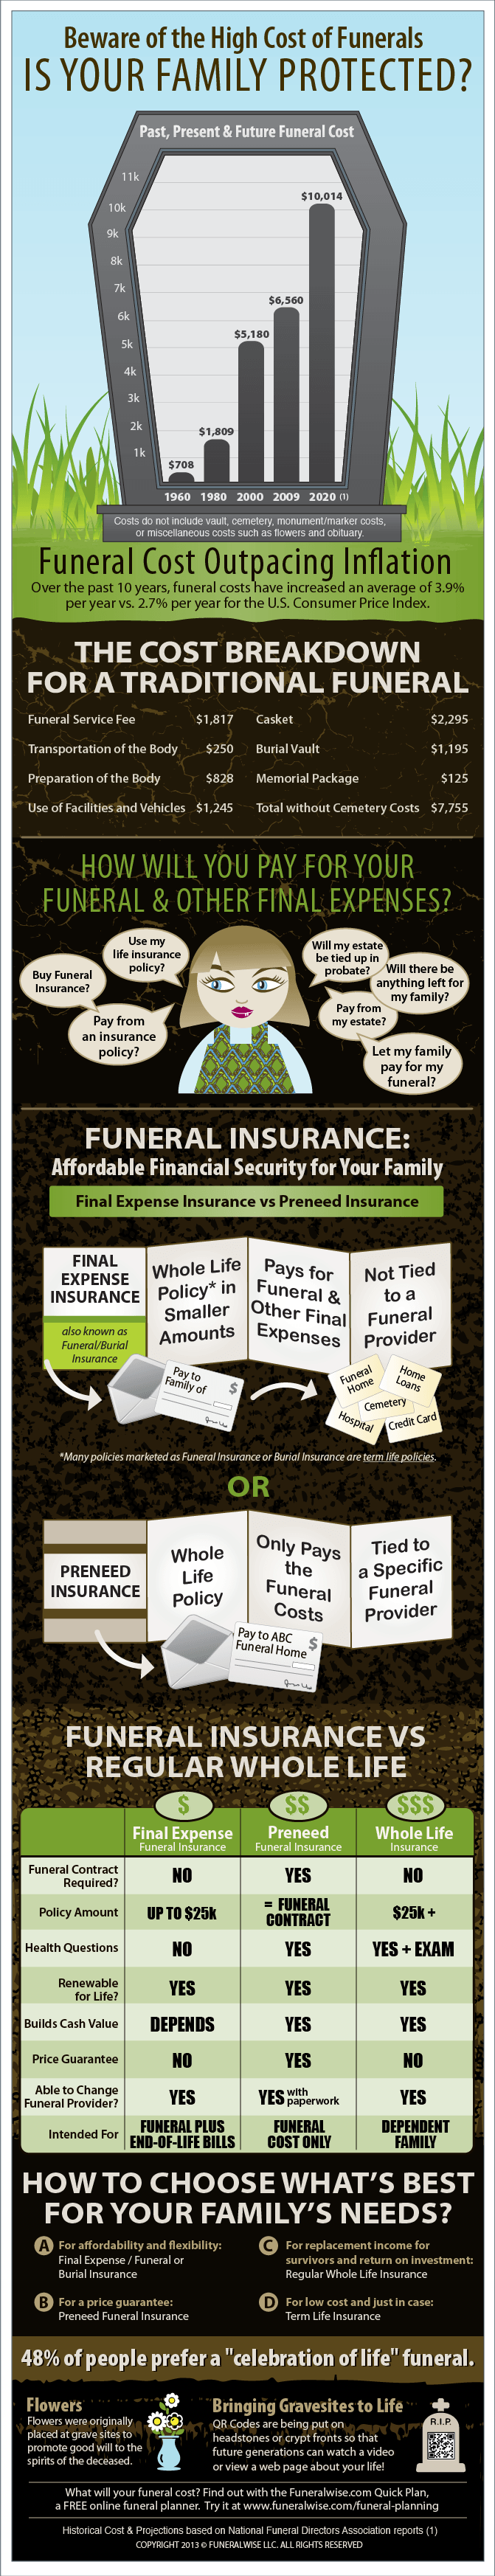 FuneralWise_Infographic.png